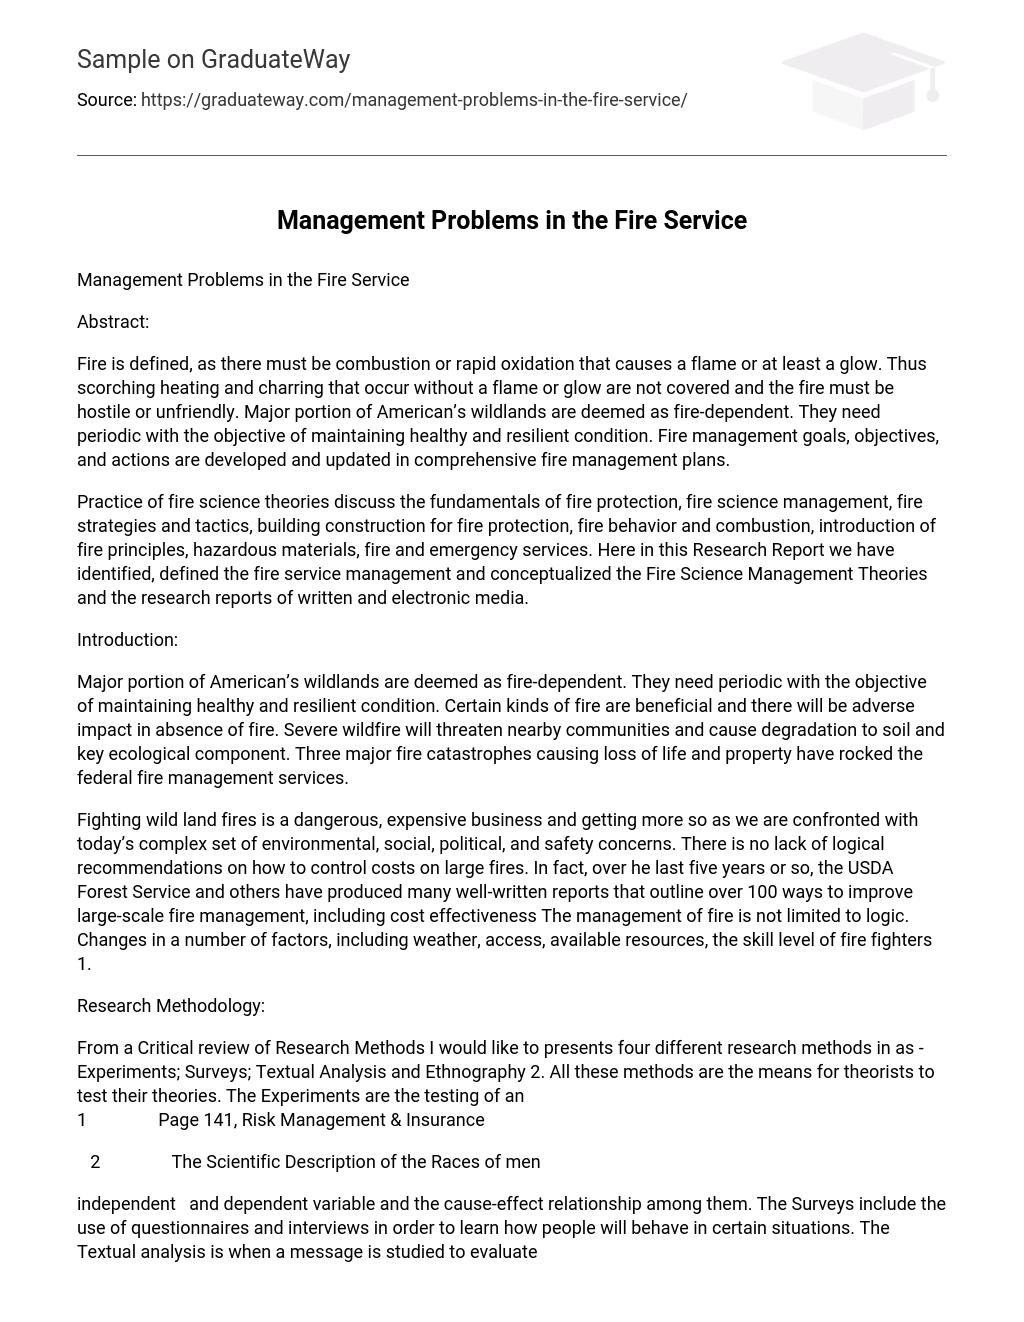 Management Problems in the Fire Service